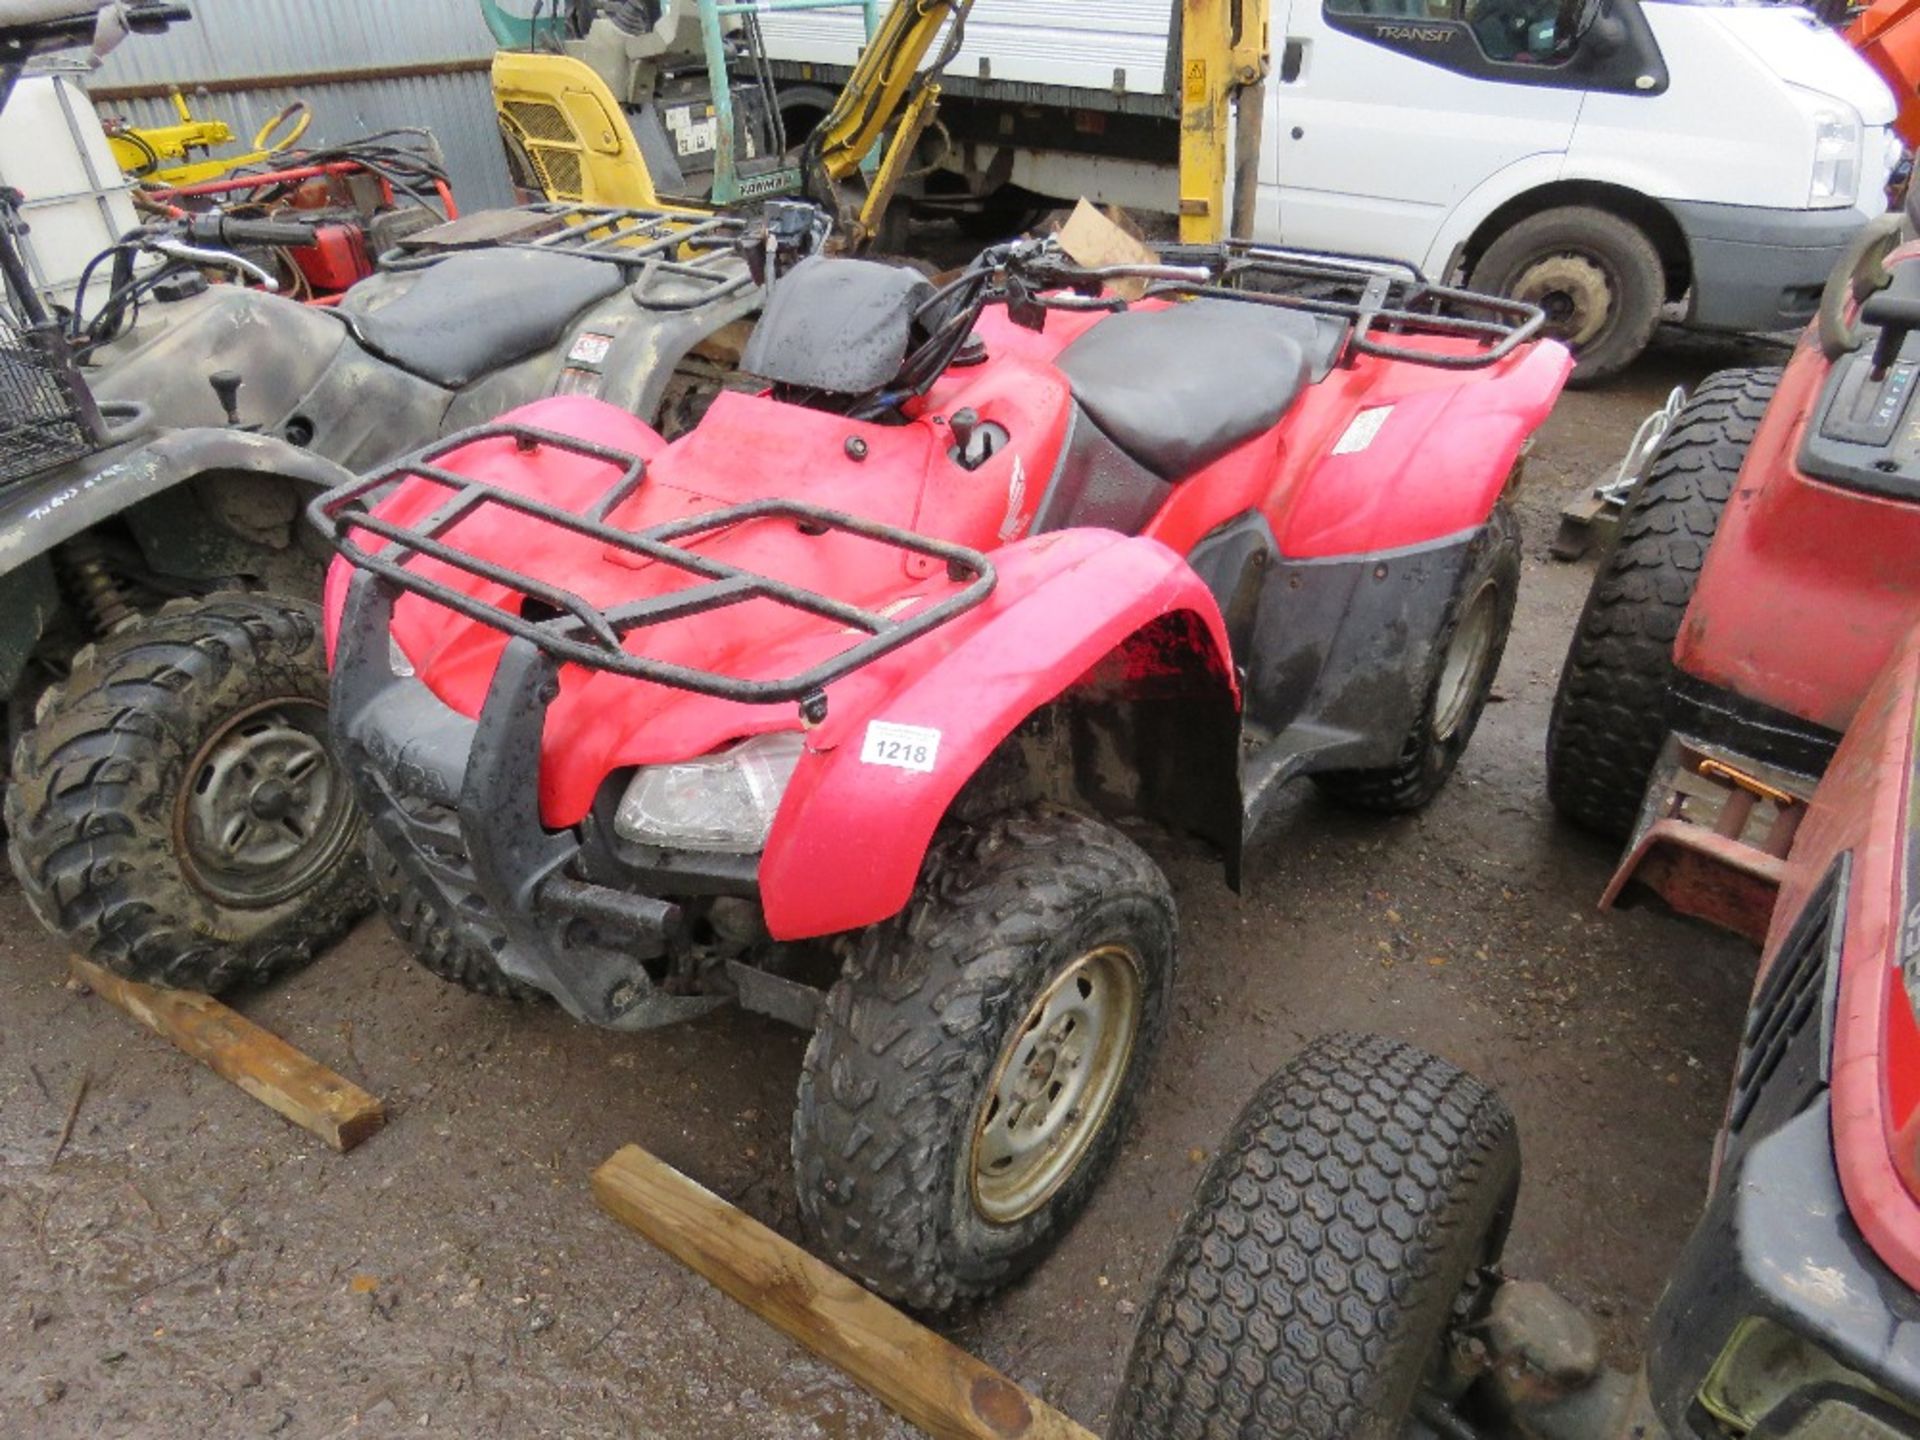 HONDA FOURTRAK 400 QUAD BIKE, YEAR 2003 APPROX. WHEN TESTED WAS SEEN TO RUN, DRIVE AND BRAKE.